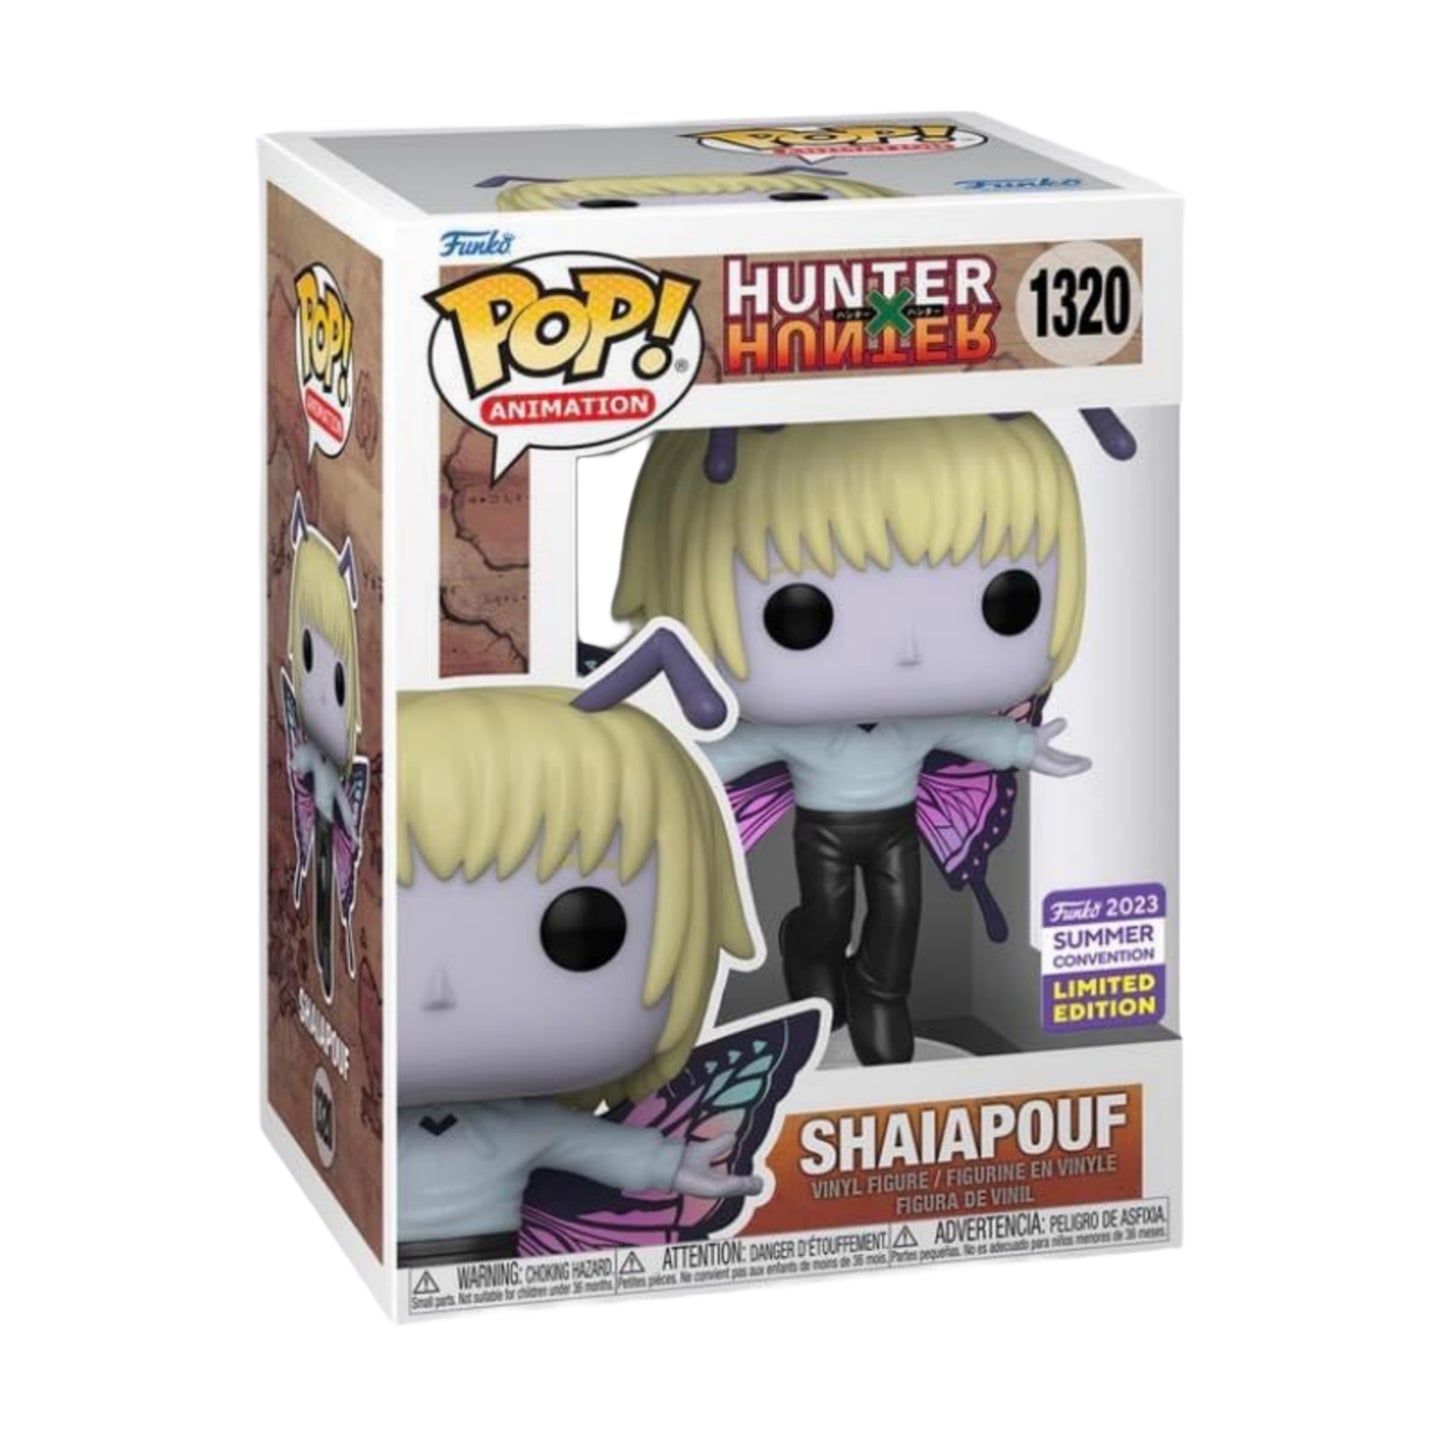 On Hand Shaiapouf Shared Exclusive Funko Pop!